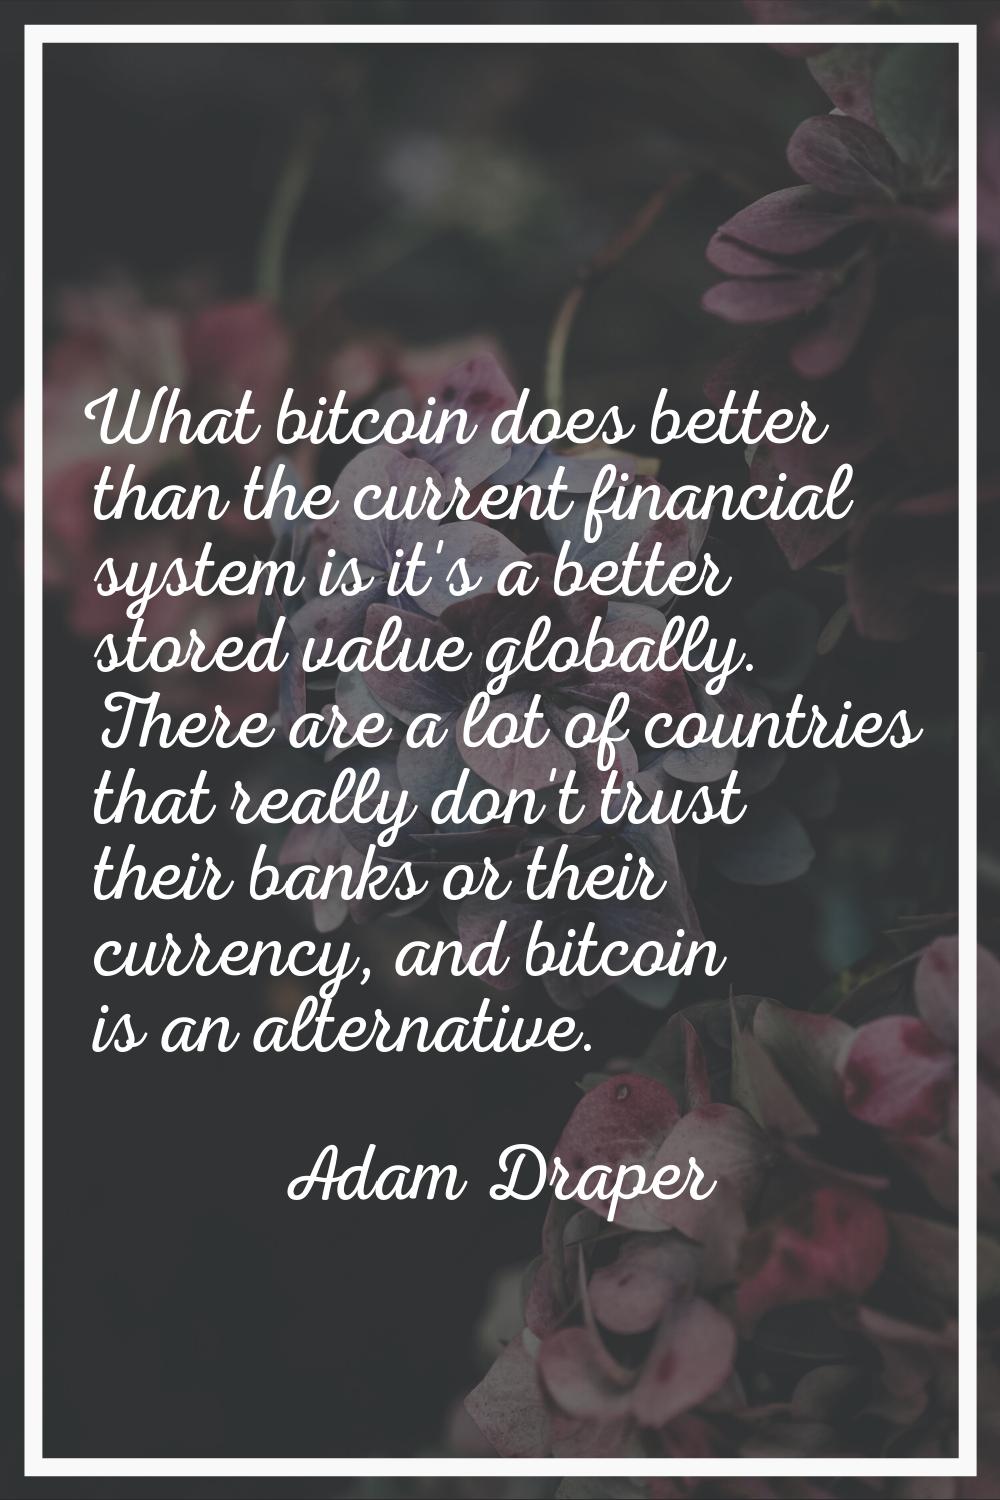 What bitcoin does better than the current financial system is it's a better stored value globally. 